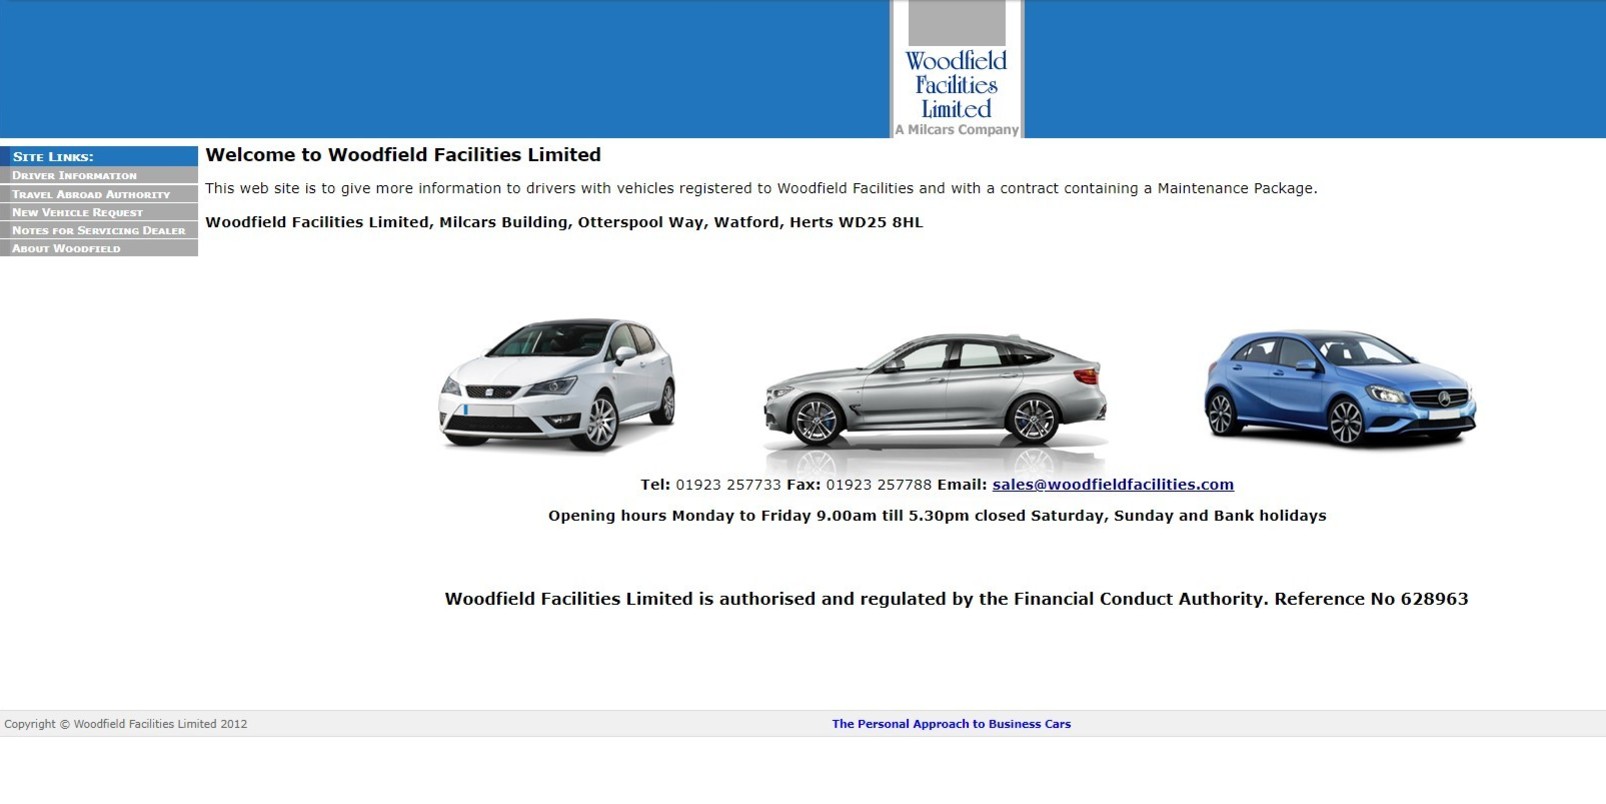 The previous Woodfield Facilities website, displayed on desktop